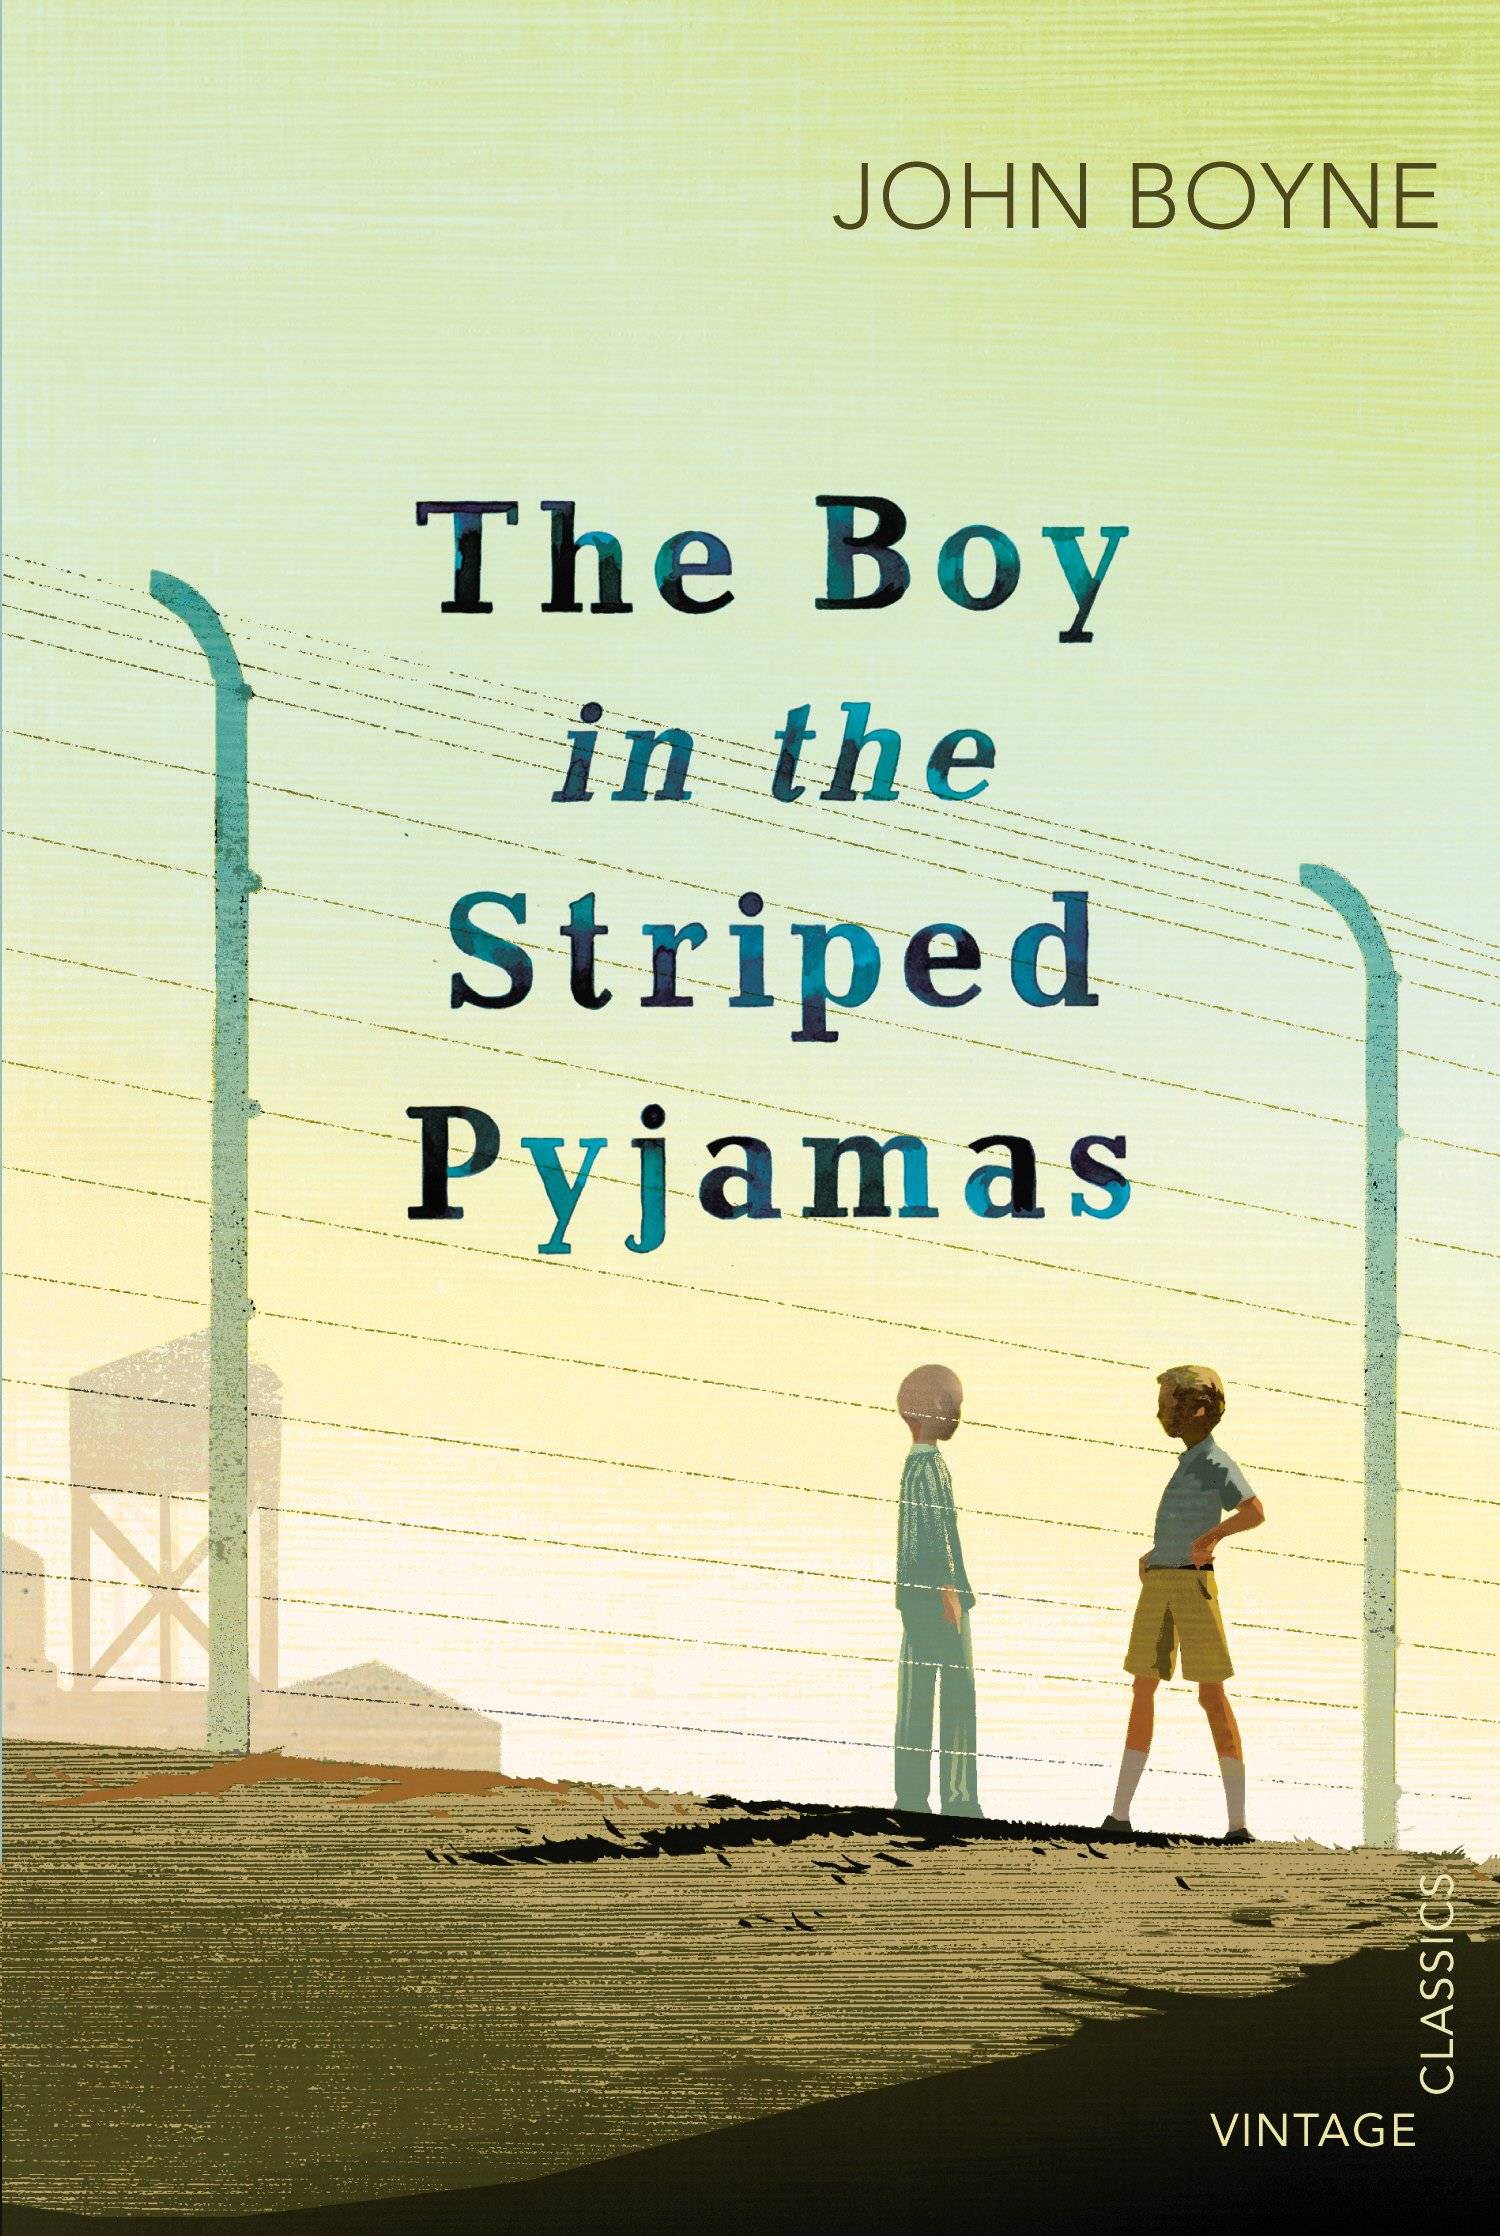 IMG : The Boy in the stripped pyjamas